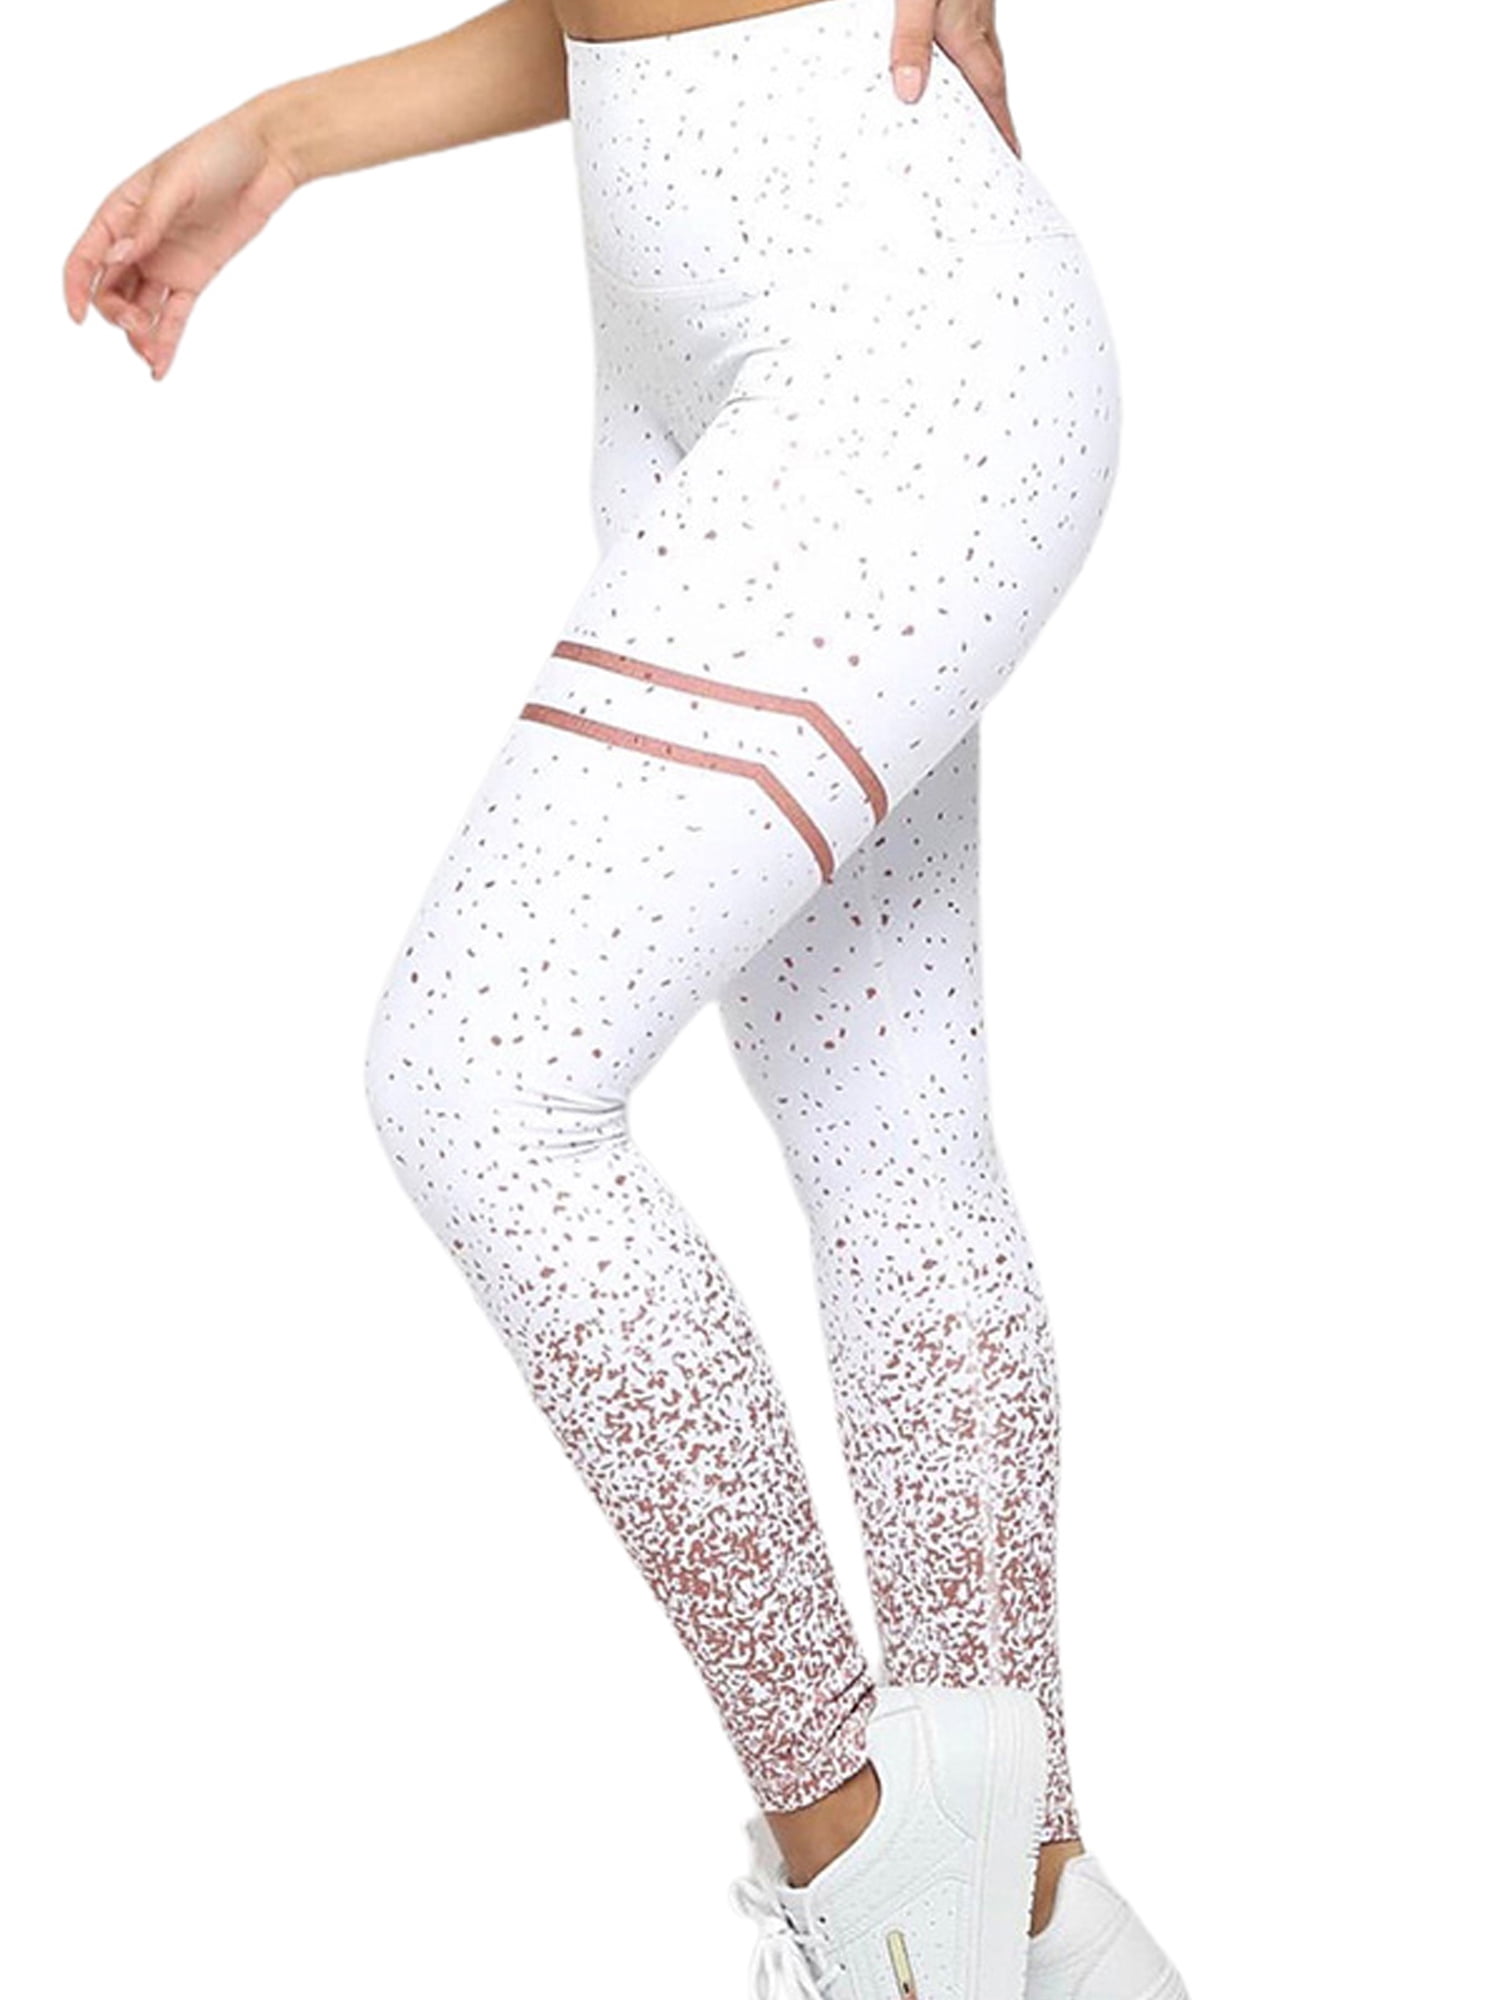 Details about   Women Leggings Yoga Pants Printed Sports Gym Fitness Trousers High Waist Bottom 